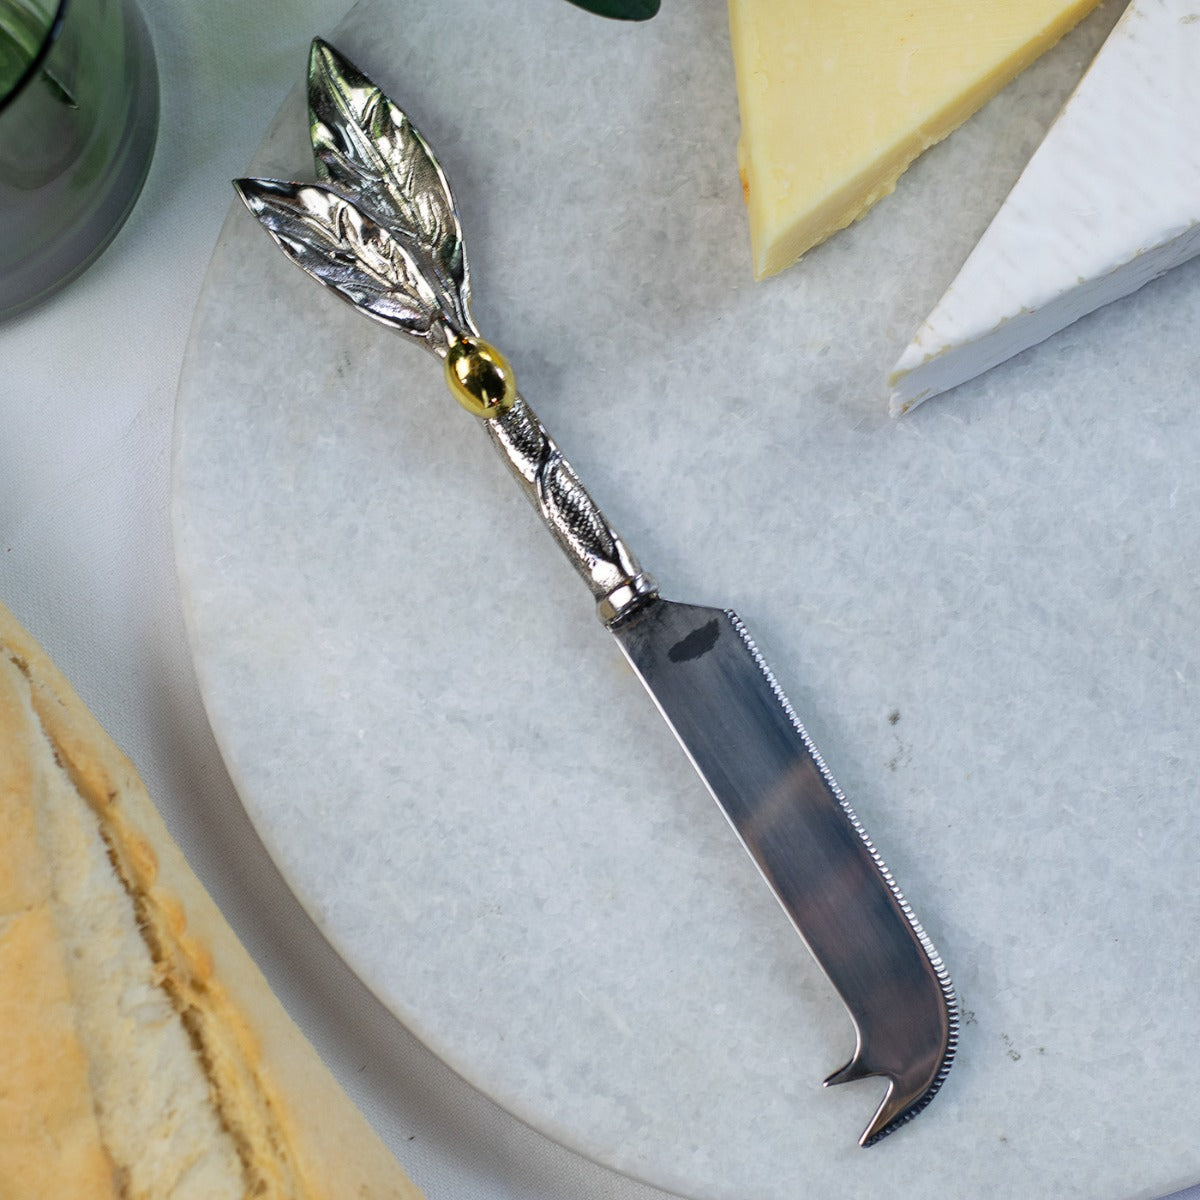 Olive Marble Cheeseboard with Knife